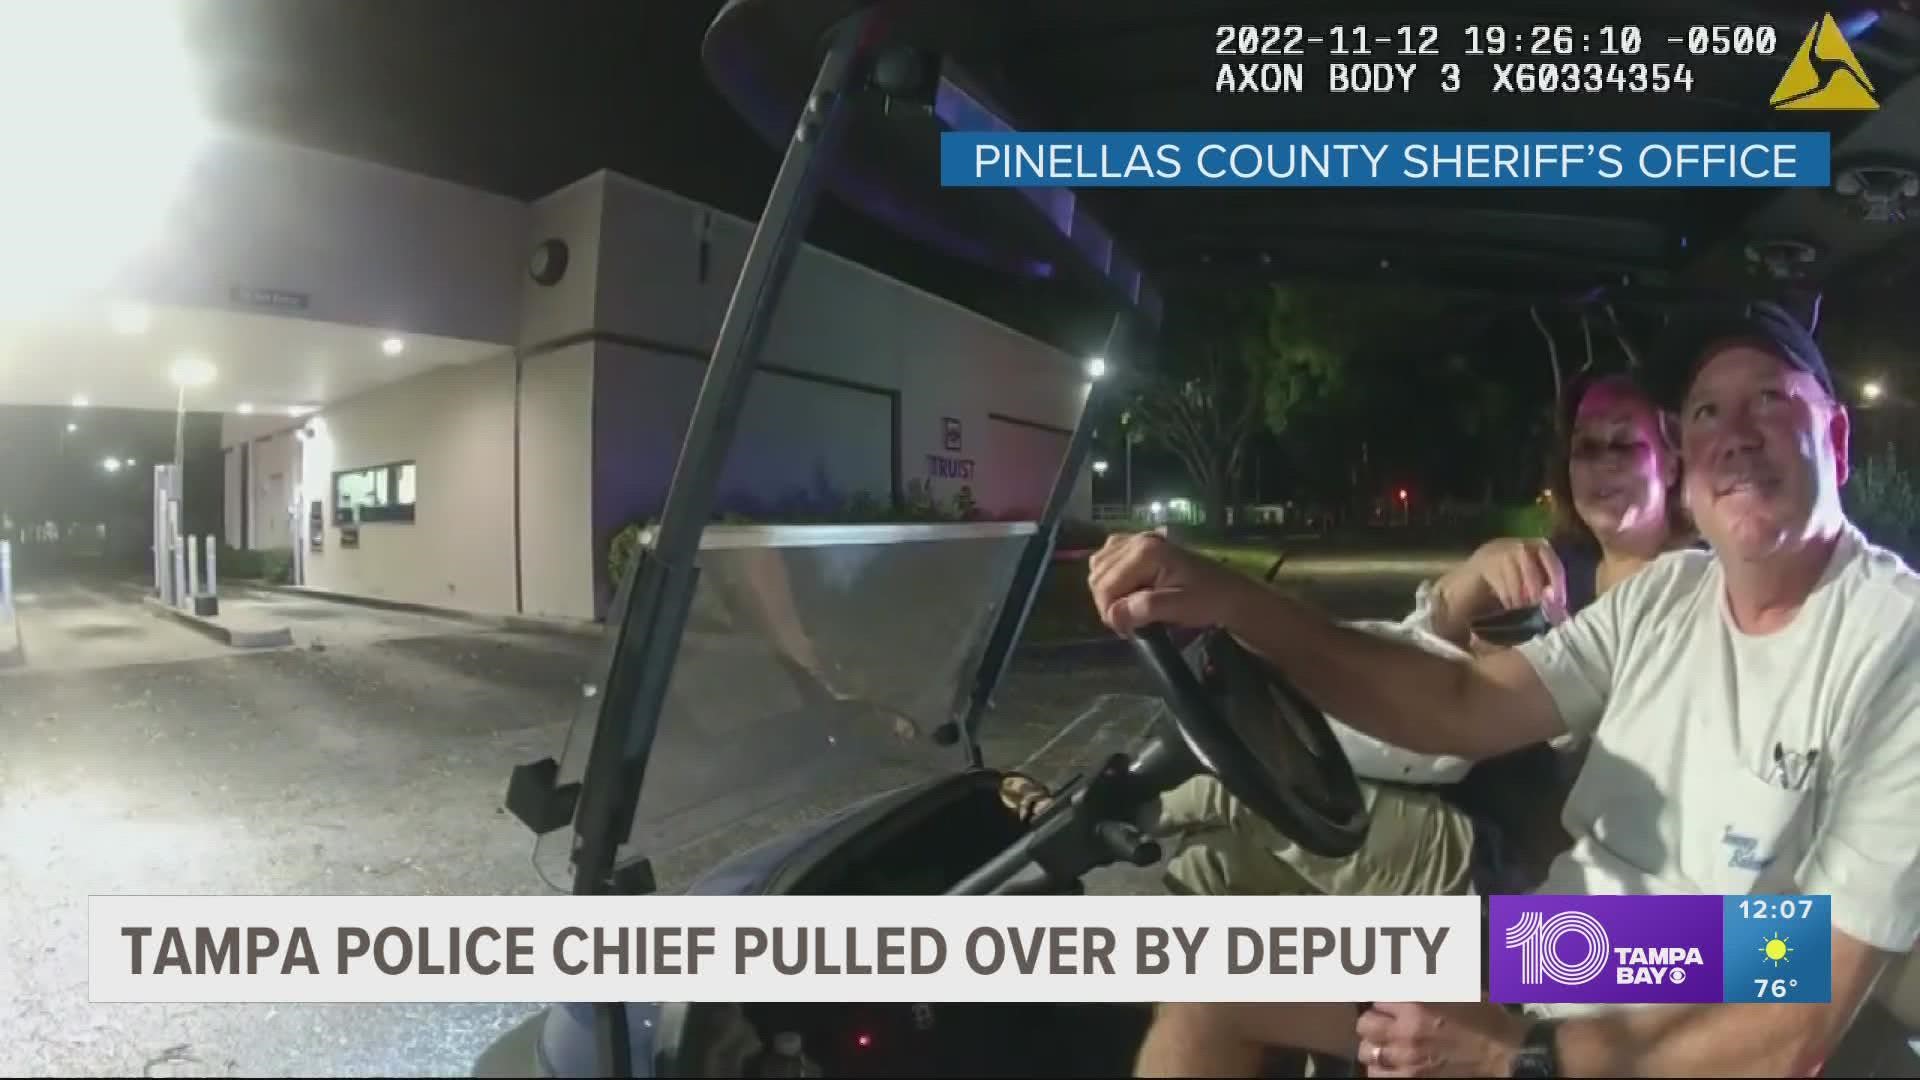 Tampa Police Chief Mary O'Connor has been placed on administrative leave after she and her spouse were pulled over while riding a golf cart without a license plate.